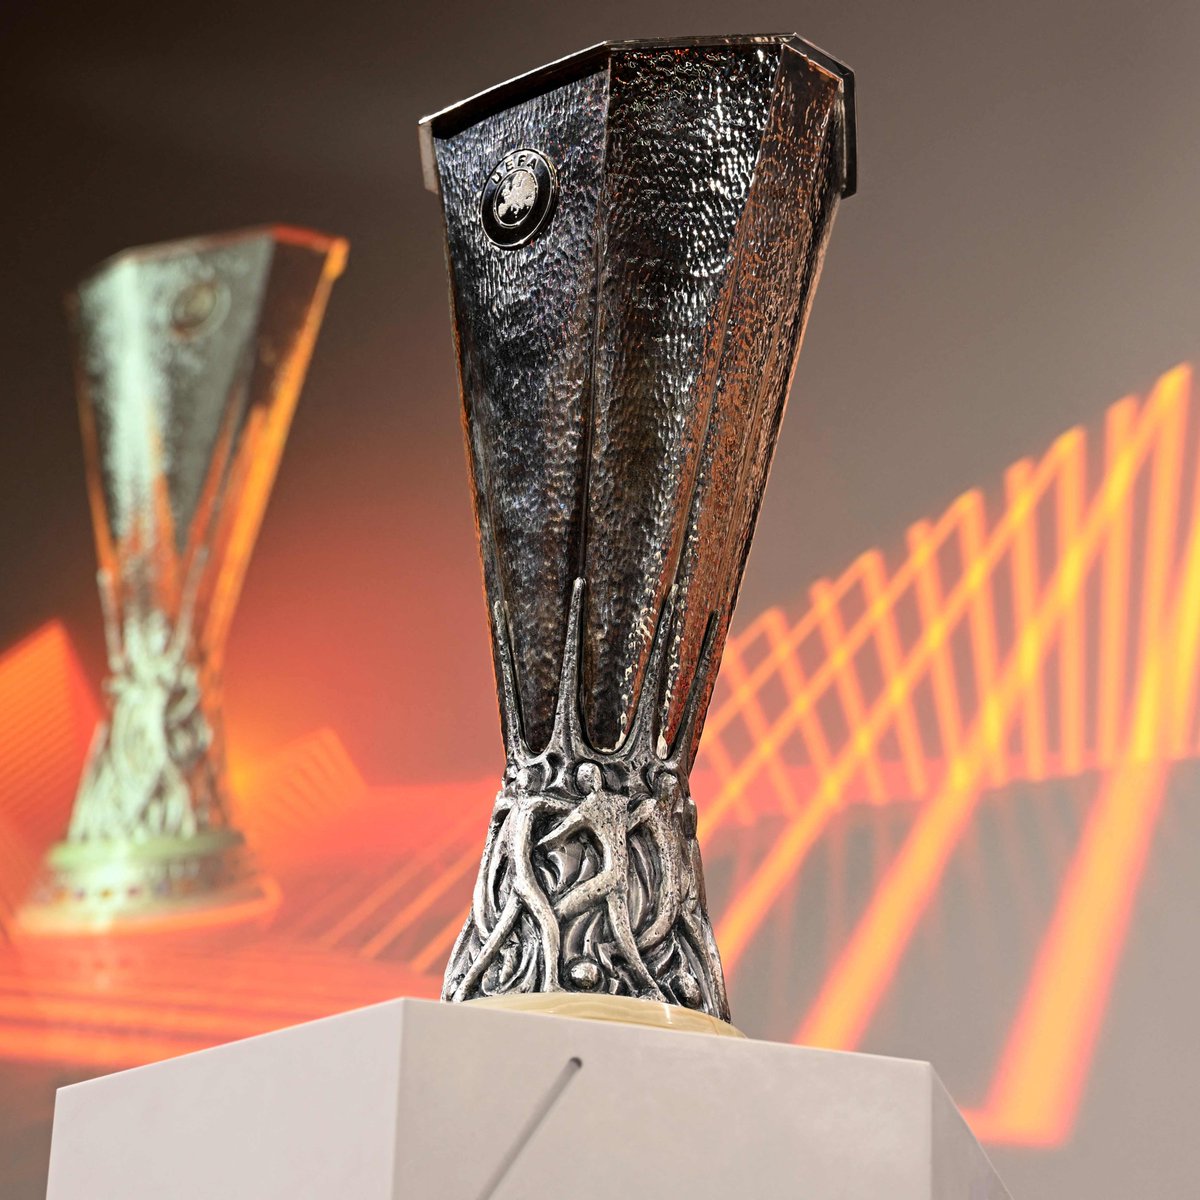 Who'll lift the 🏆 this year?

#UEL https://t.co/xbMFSPuMQB